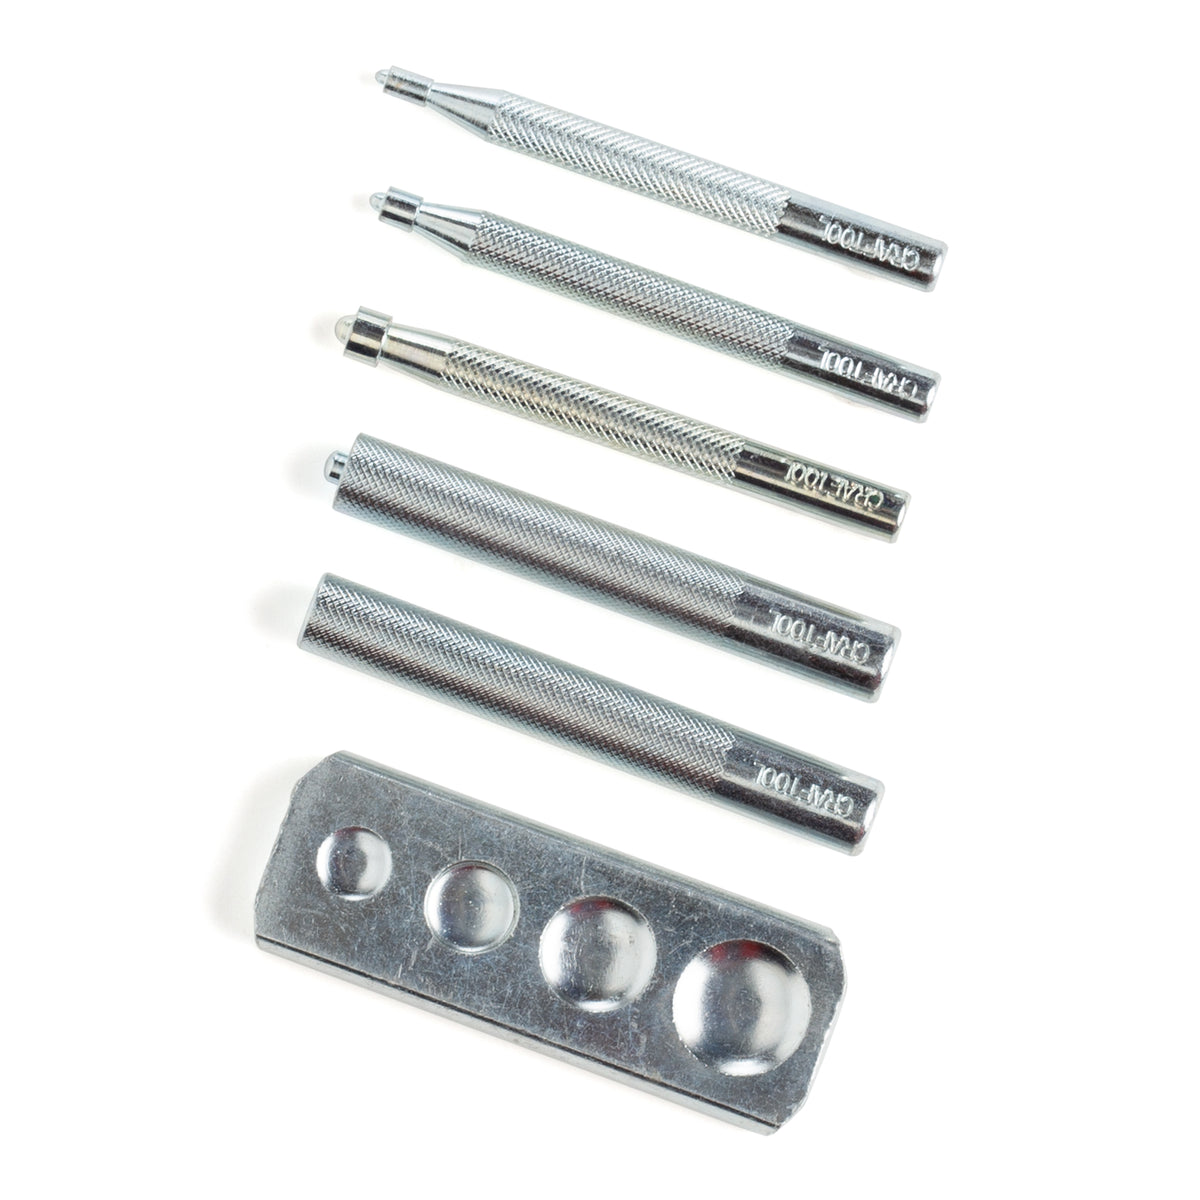 Snap Setting Tool Kit (11 pieces - for Multiple Snap Sizes)